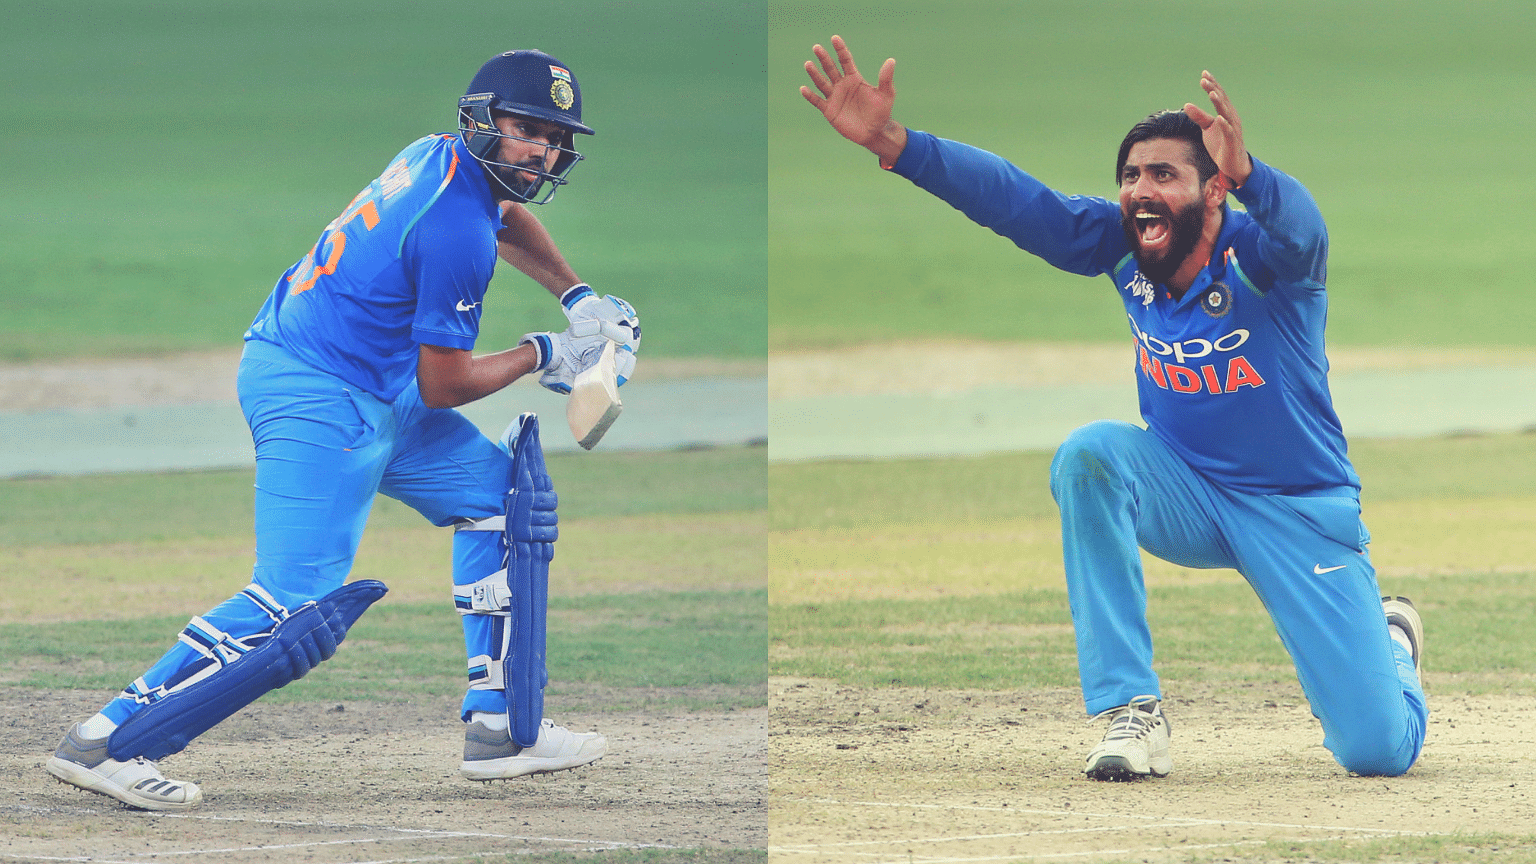 Rohit Sharma (right) en route to his 83 not out and Ravindra Jadeja in action against Bangladesh.